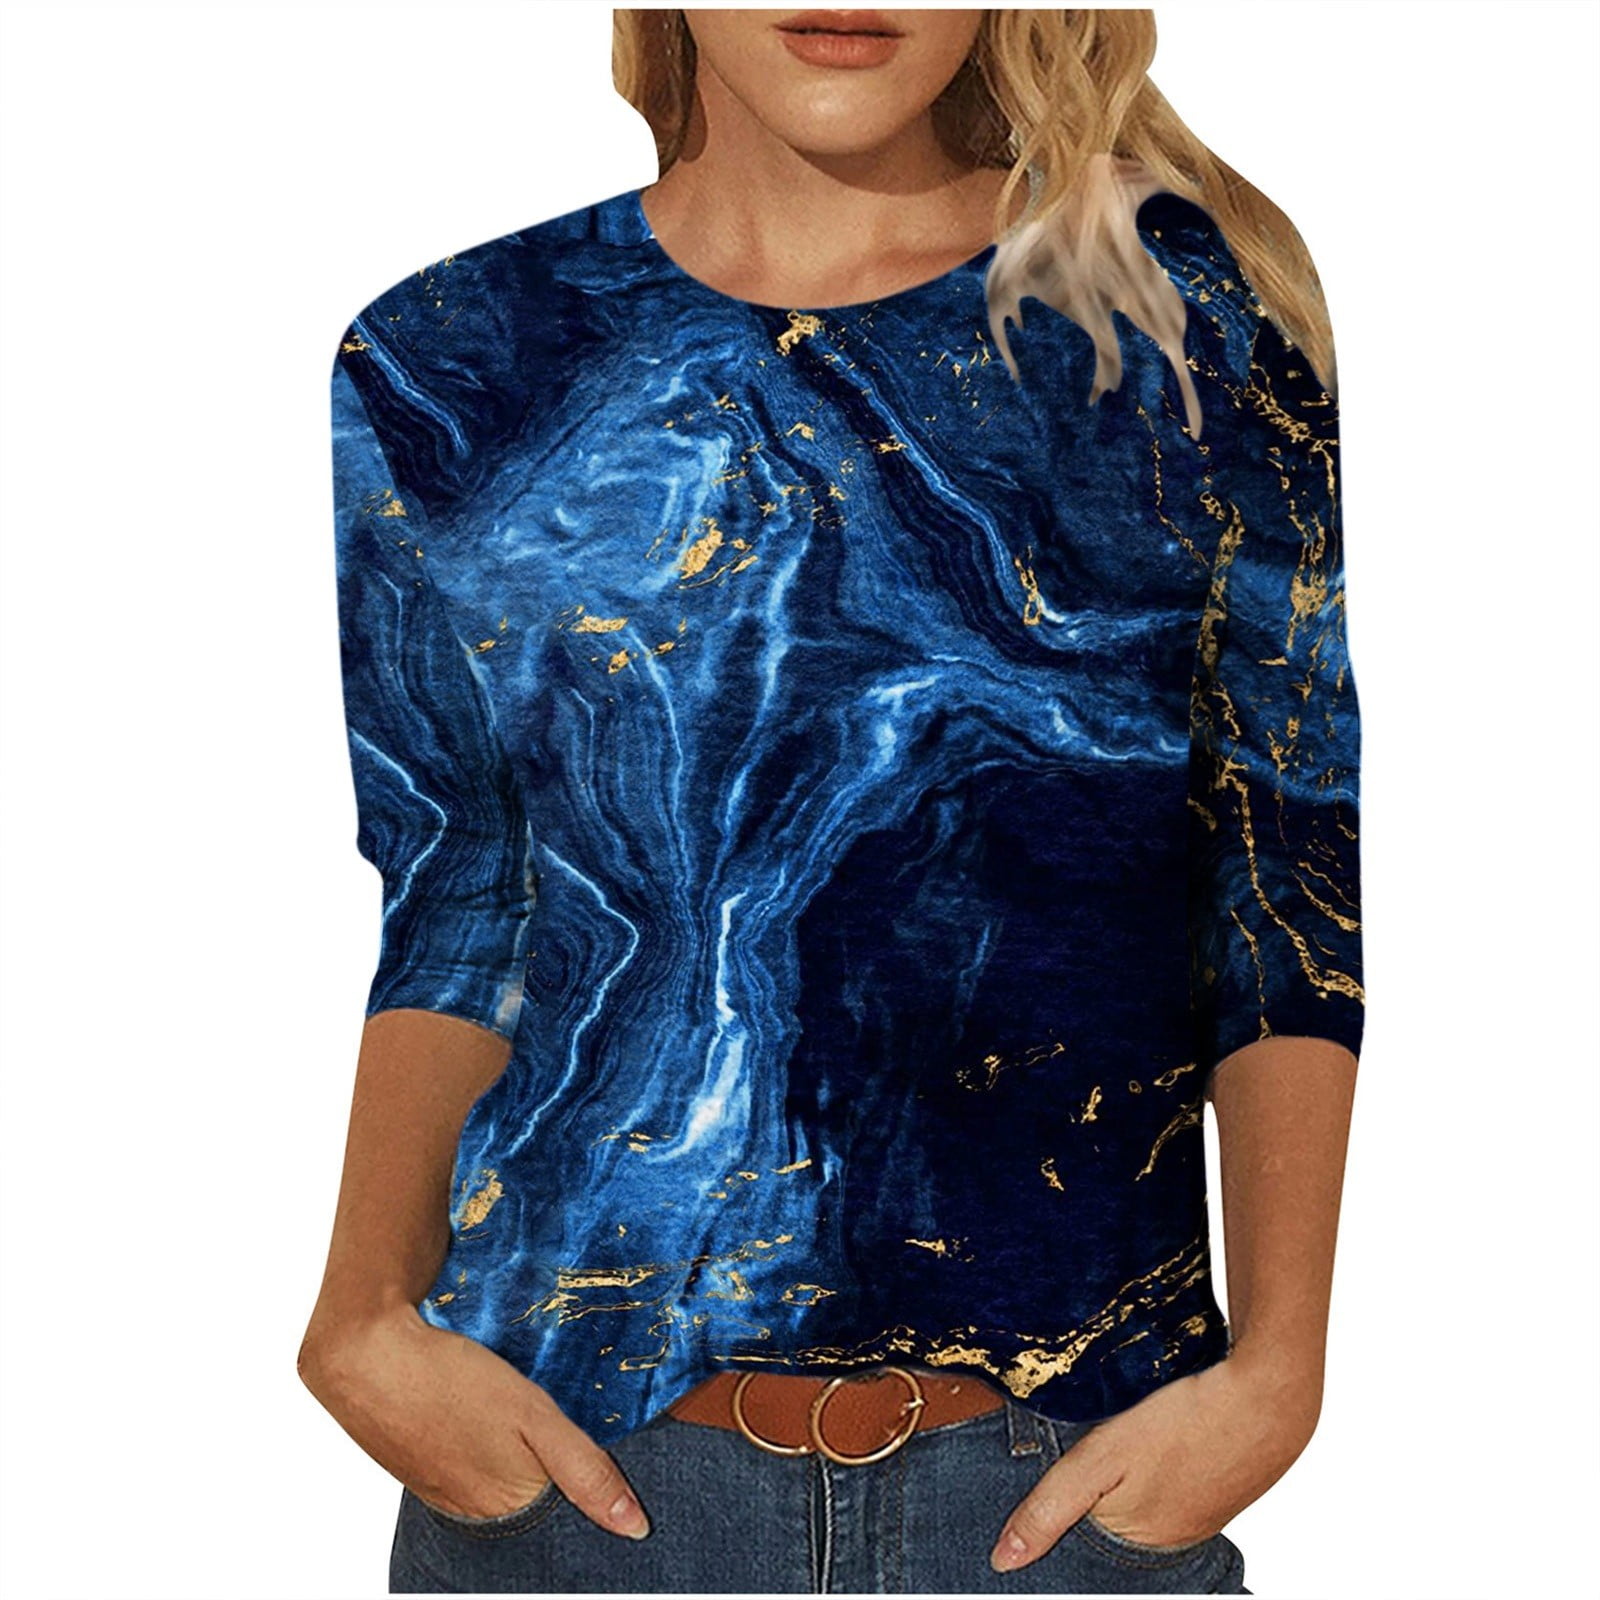 Tie Dye 3/4 Sleeve Shirts for Women, Round Neck Loose Pullover Tops ...